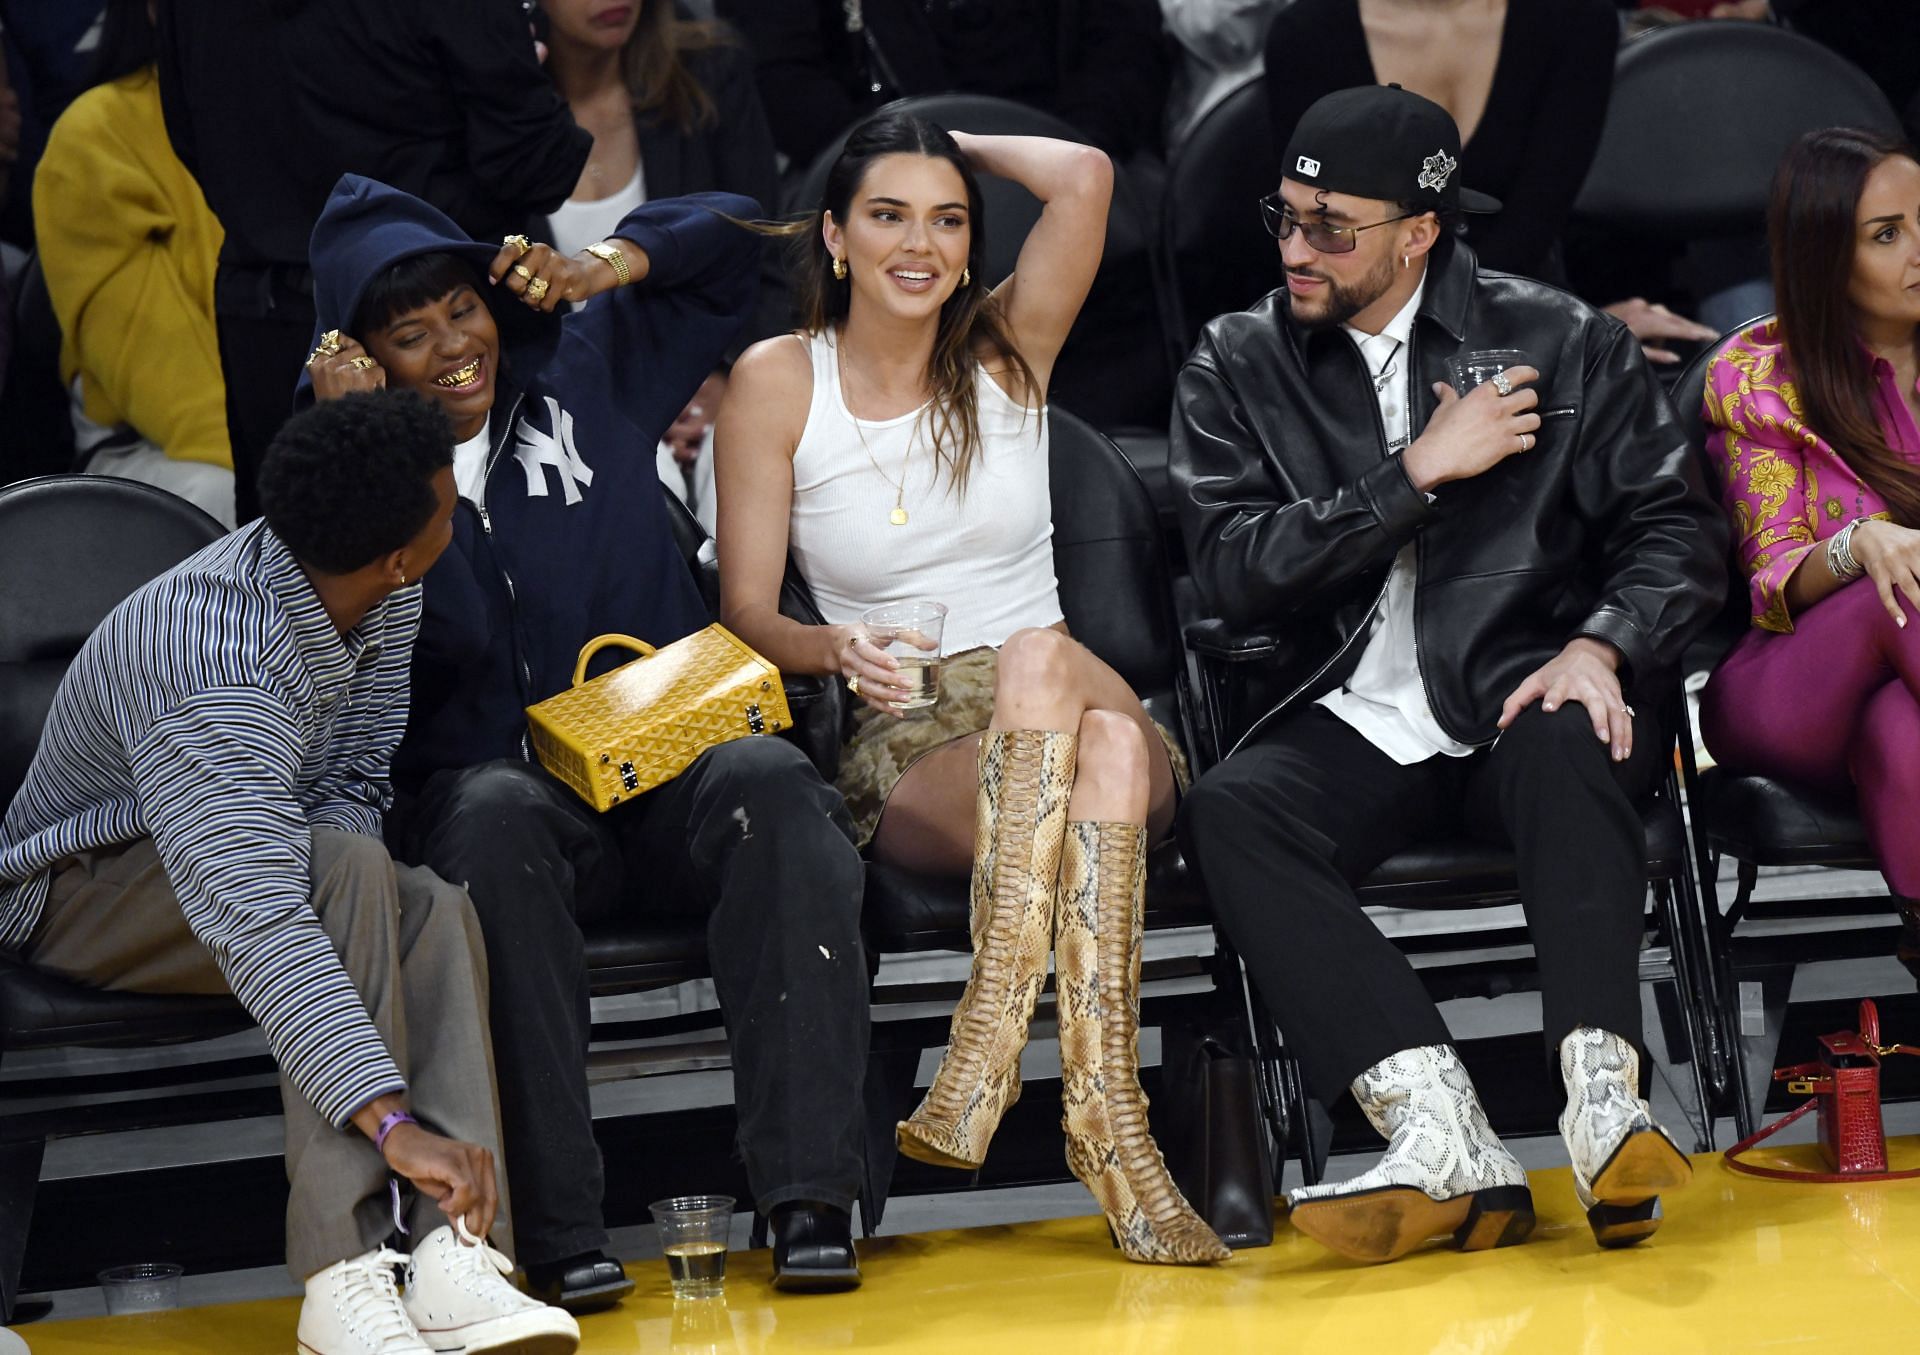 Kendall Jenner sits beside Bad Bunny at a Lakers playoff game.